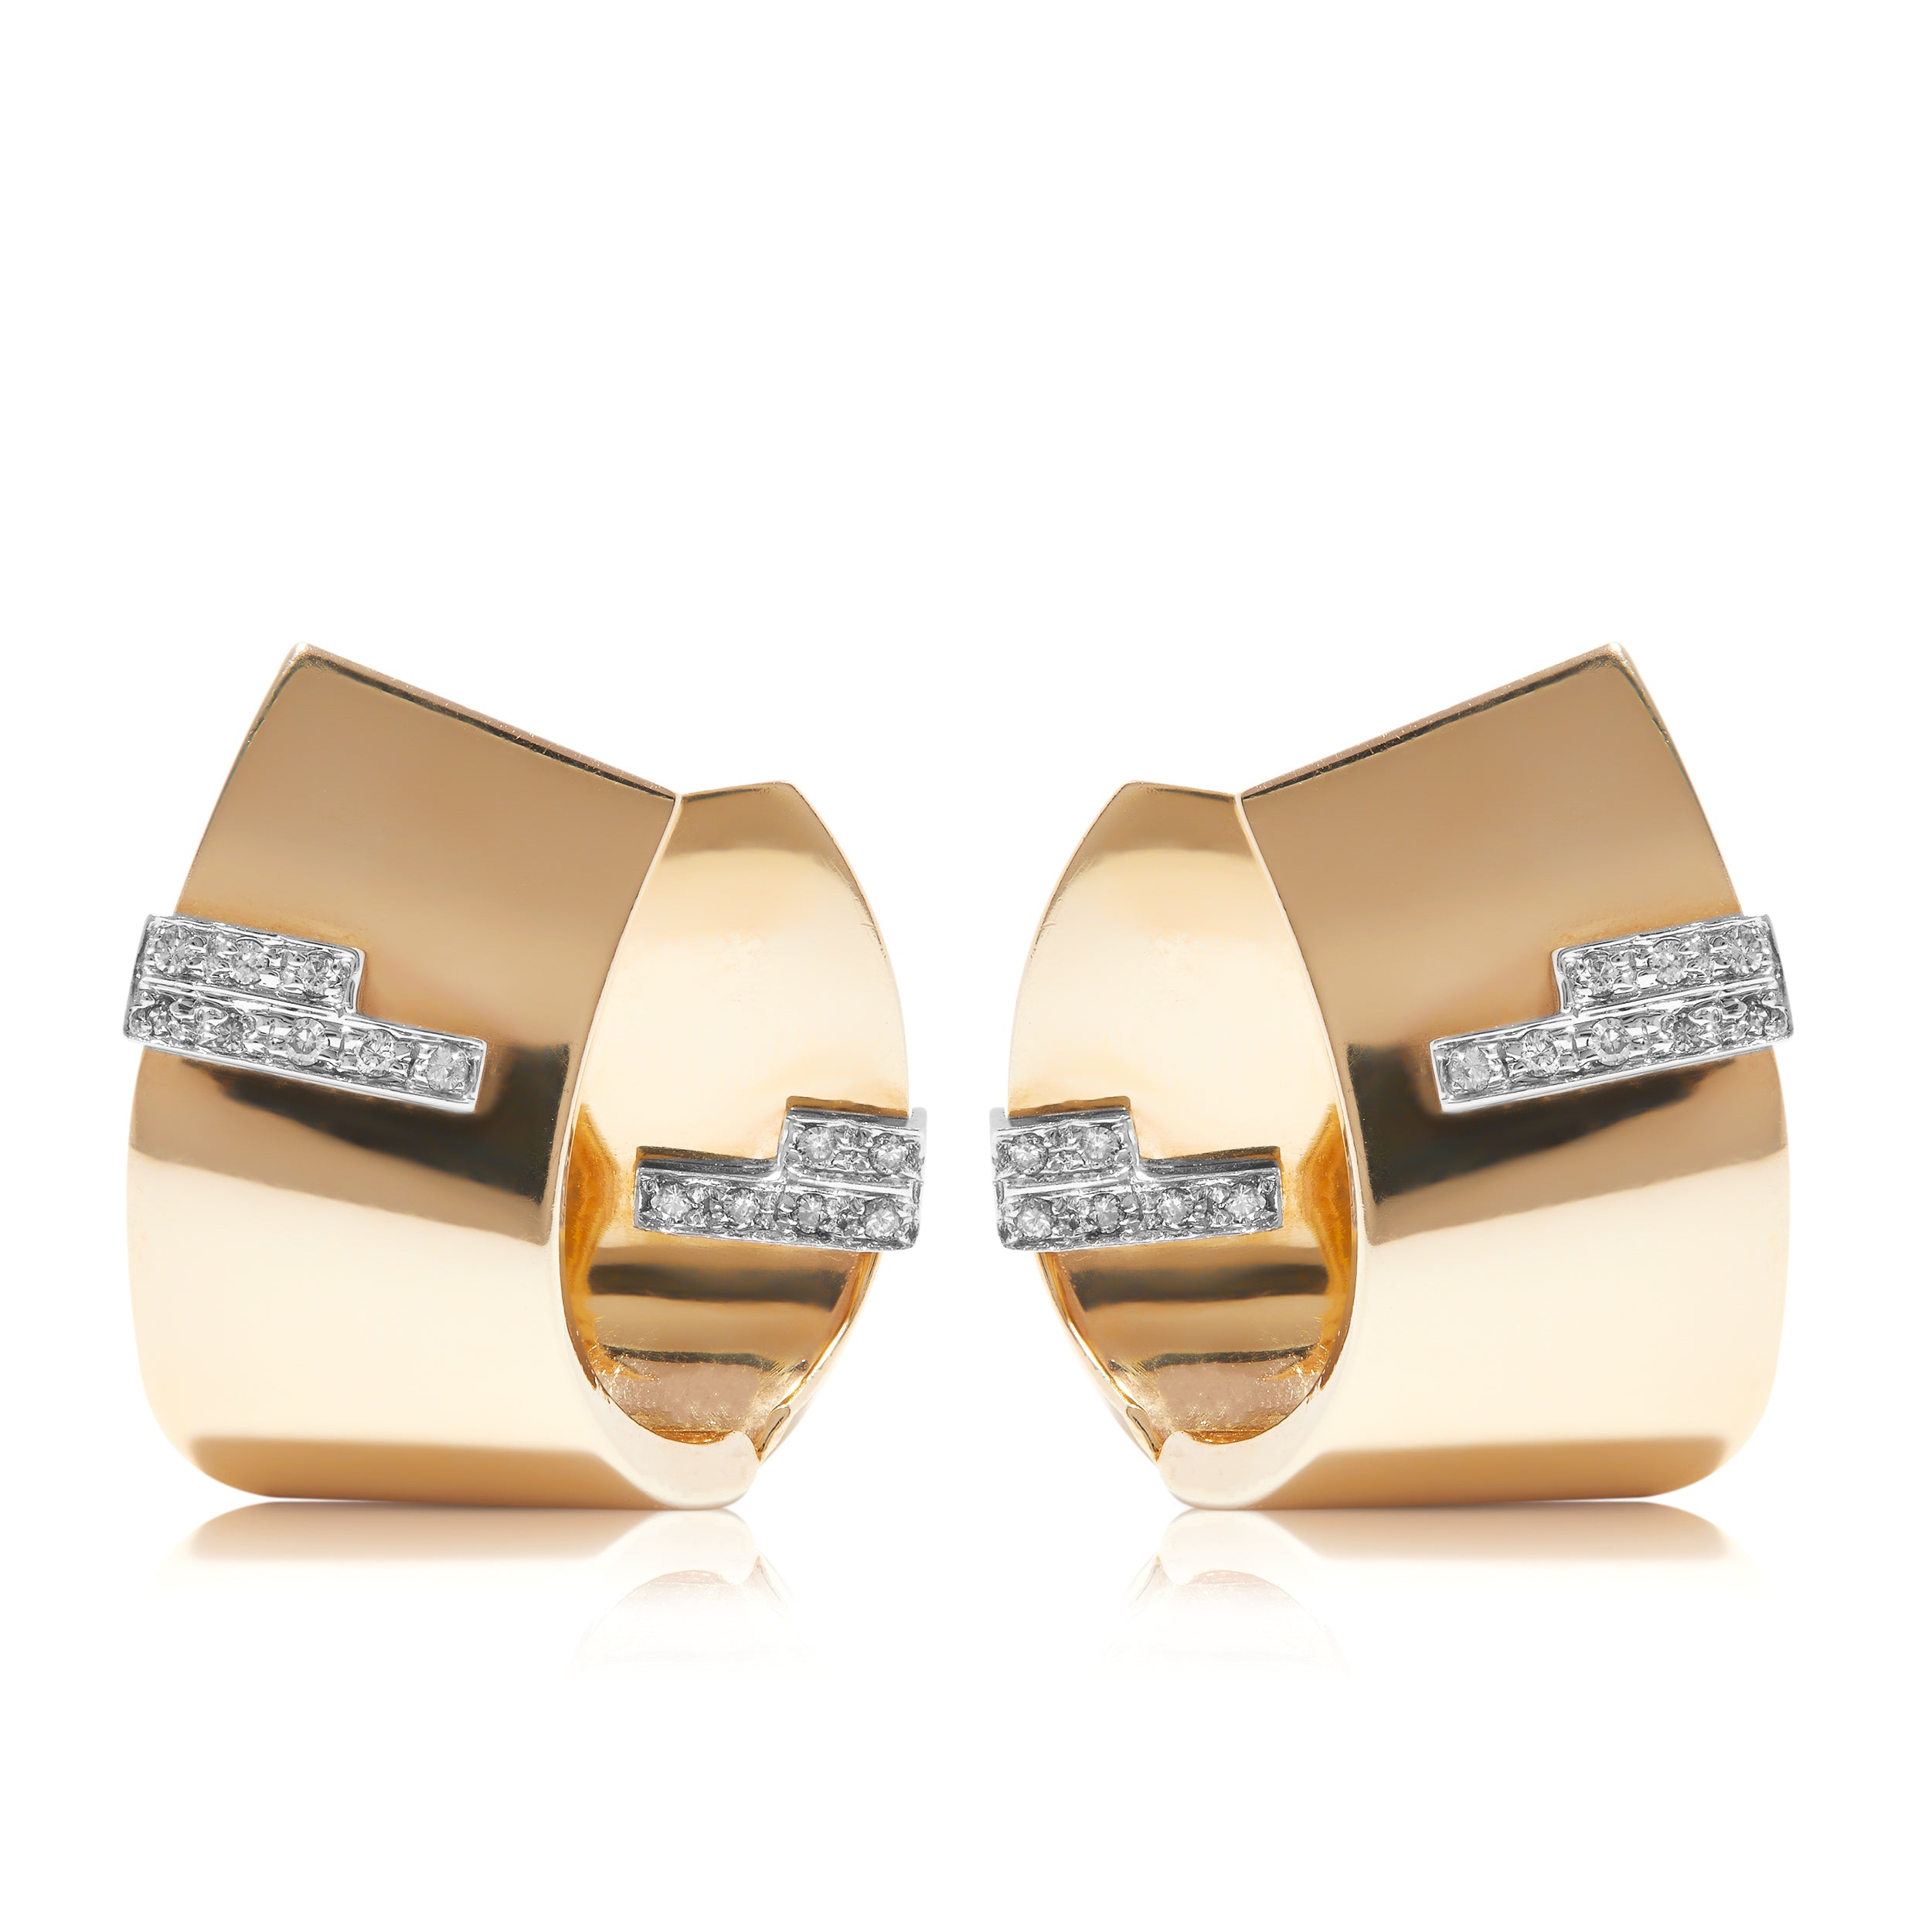 Italian retro earrings stylized in 14ct gold and diamonds from the 1930s-1950s. 